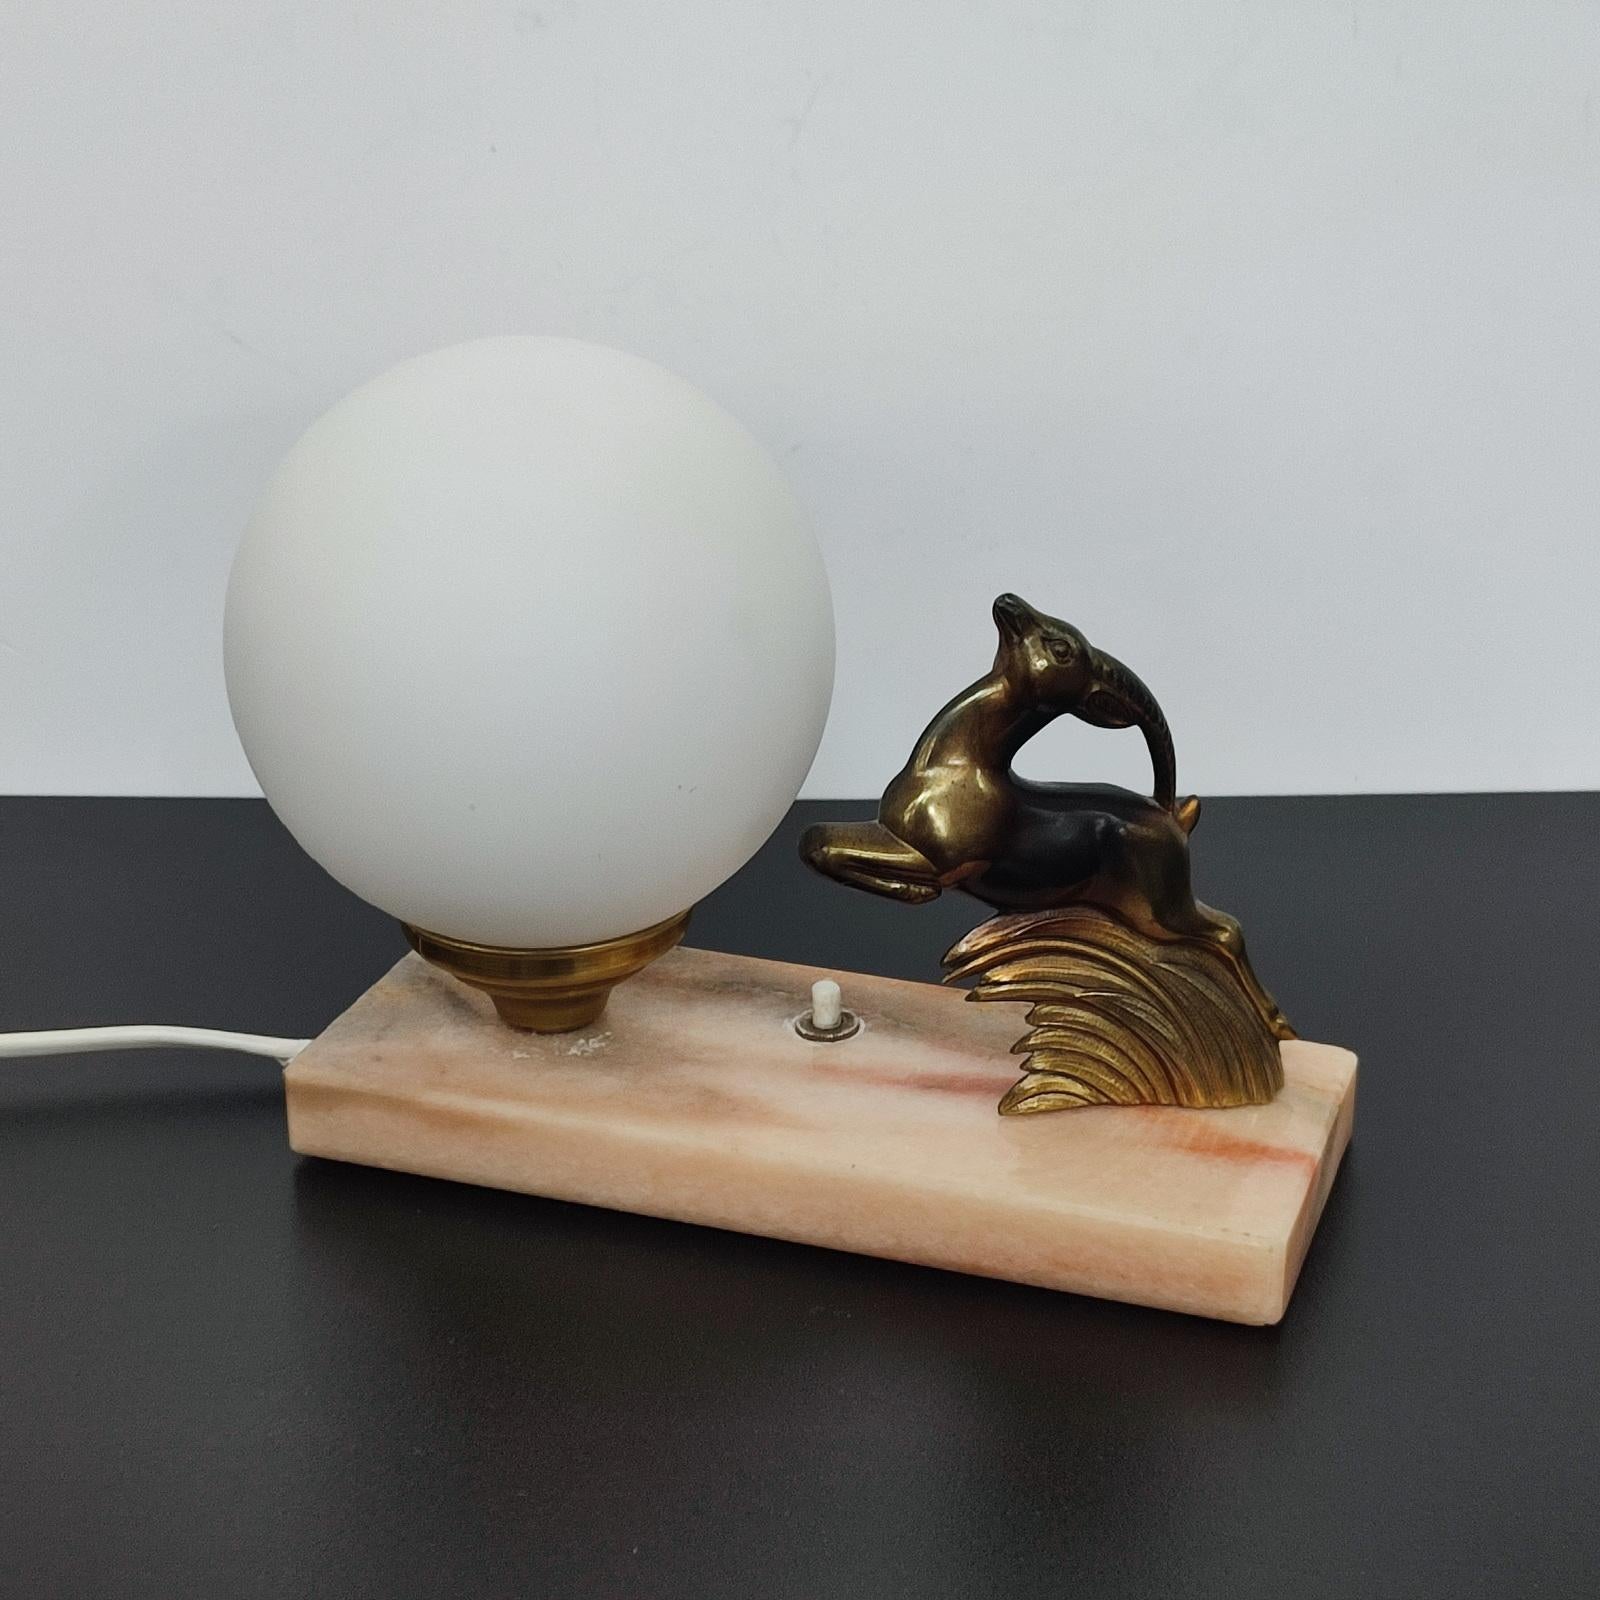 Art Deco table lamp or night lamp, jumping deer, white satined glass globe, on marble base.
Switch on the base. E14 light bulb. On request, we can replace it with E12for the US.
Good overall condition, few wear on the marble, light patina,